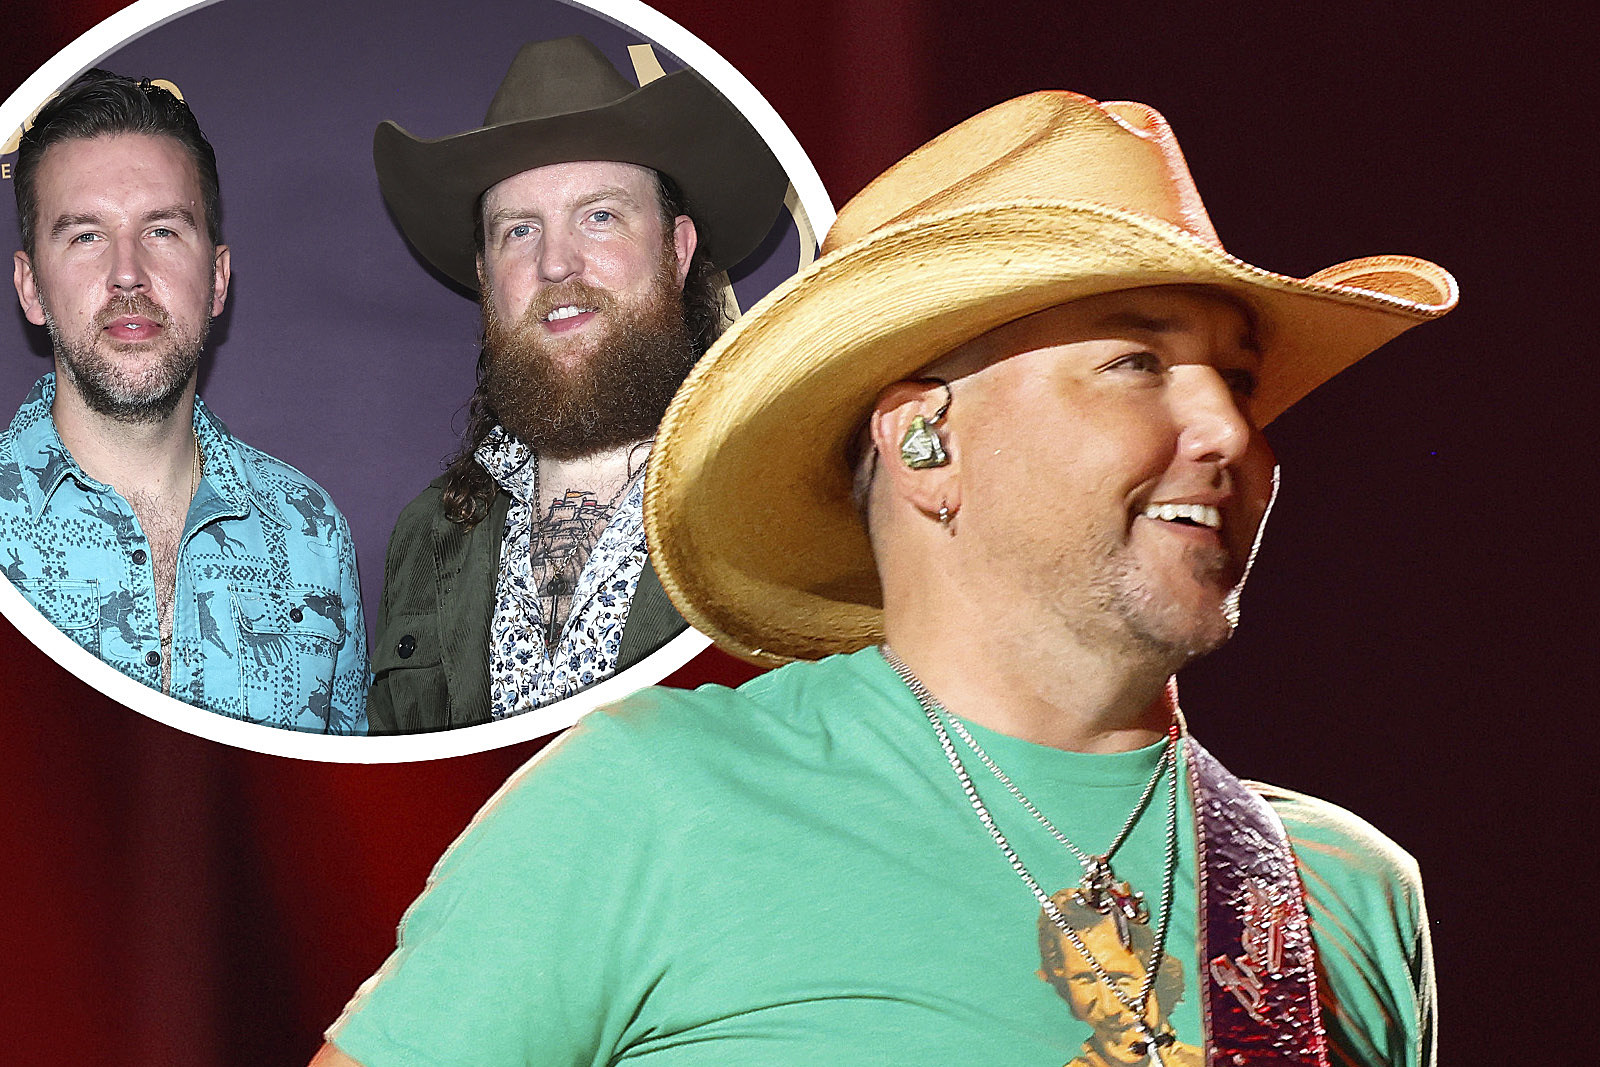 5 New Country Music Tours Announced This Week (Nov. 25-Dec. 1)